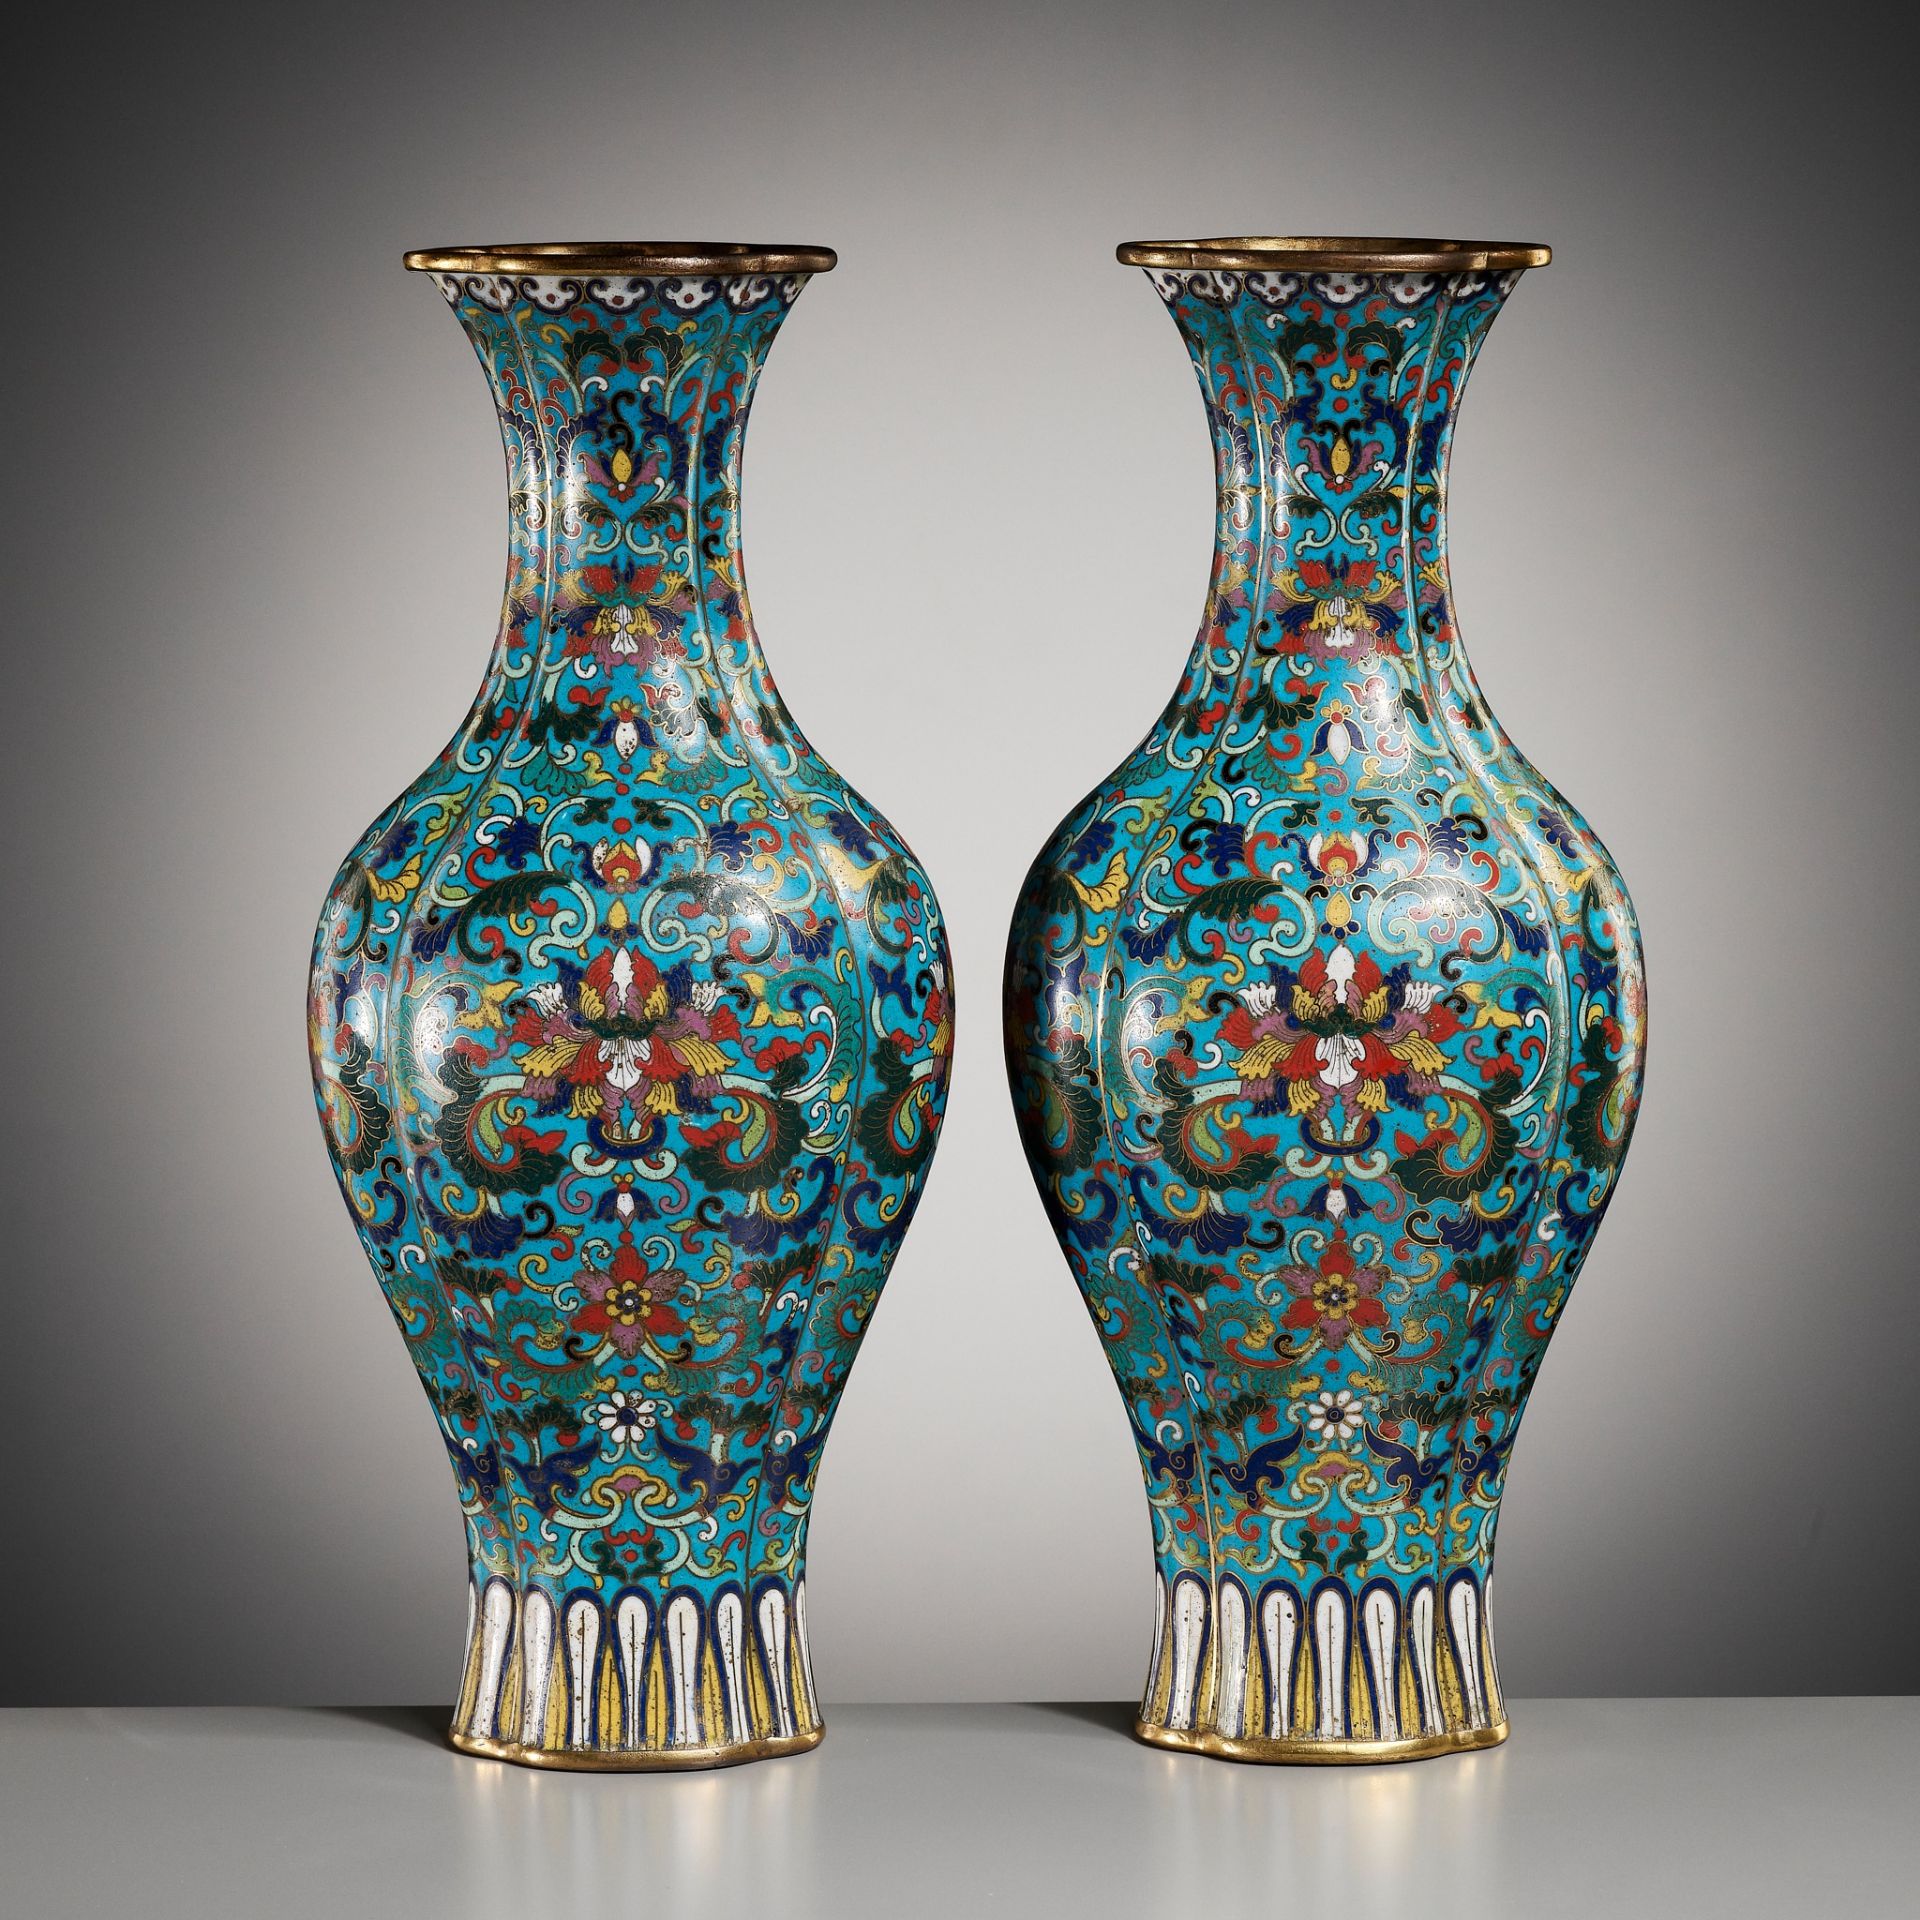 AN IMPERIAL PAIR OF QUADRILOBED CLOISONNÉ ENAMEL ‘LOTUS’ VASES, QIANLONG MARK AND OF THE PERIOD